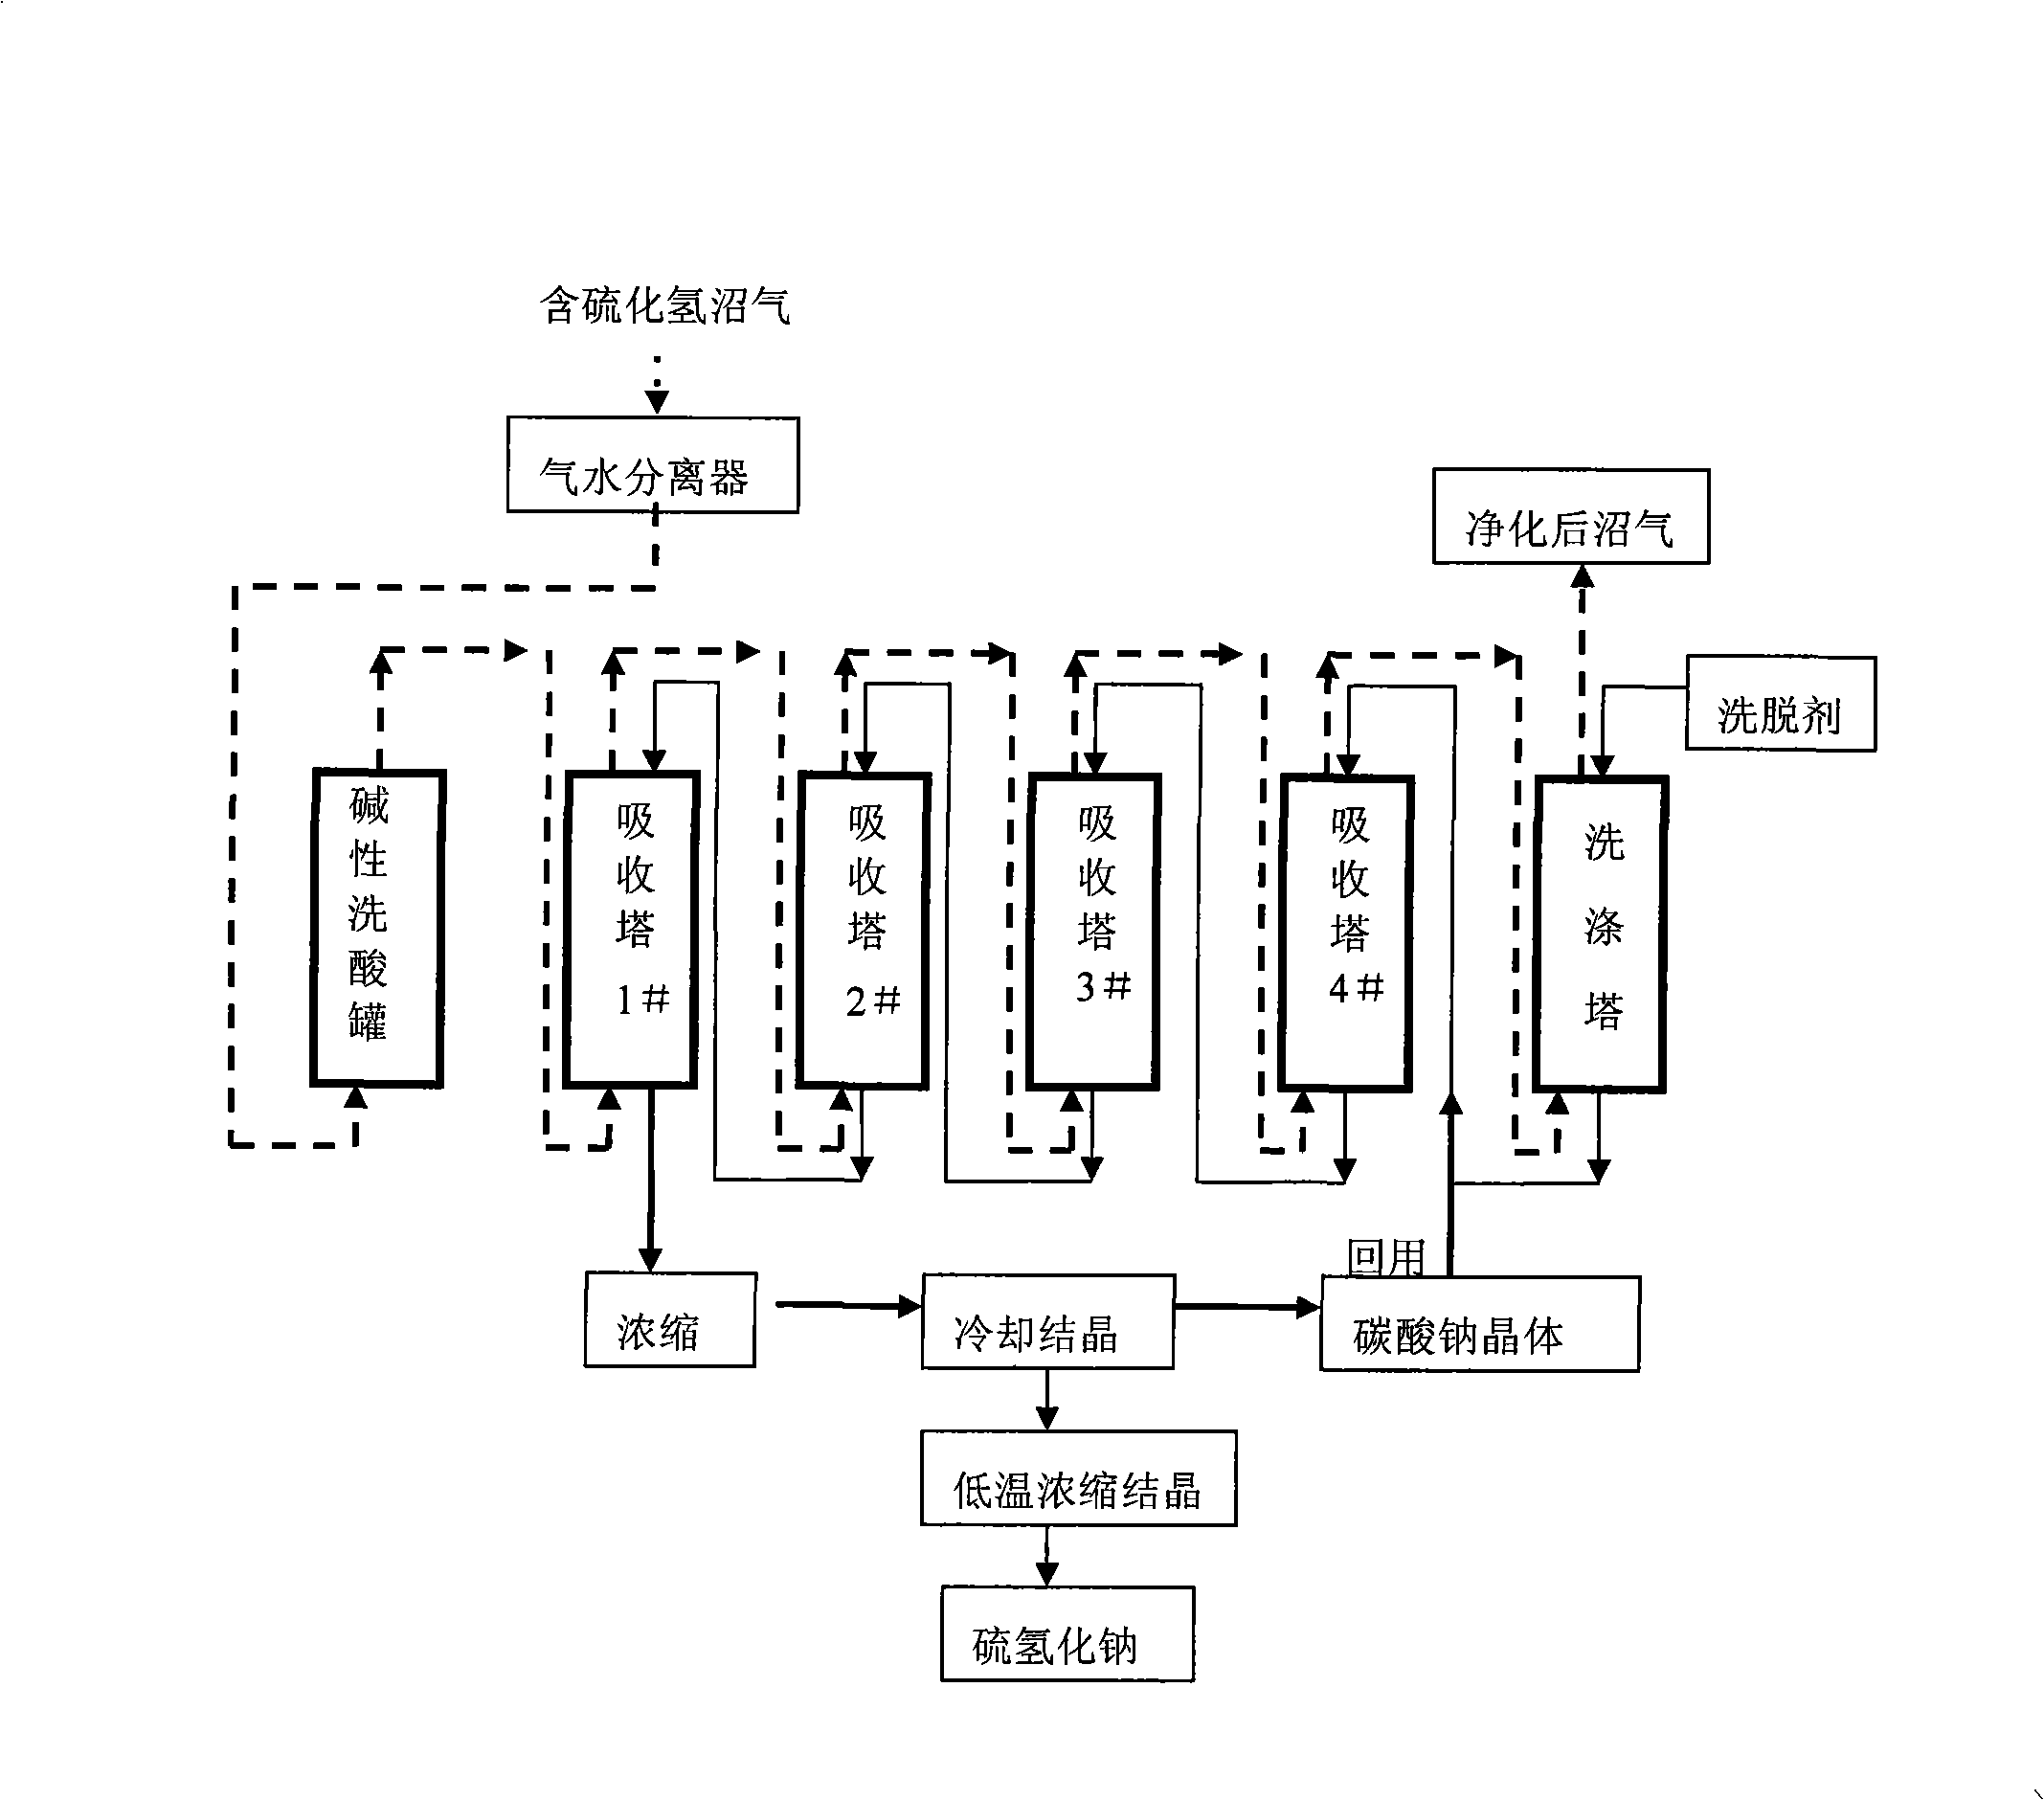 Process for recovering hydrogen sulfide form anaerobic fermentation methane